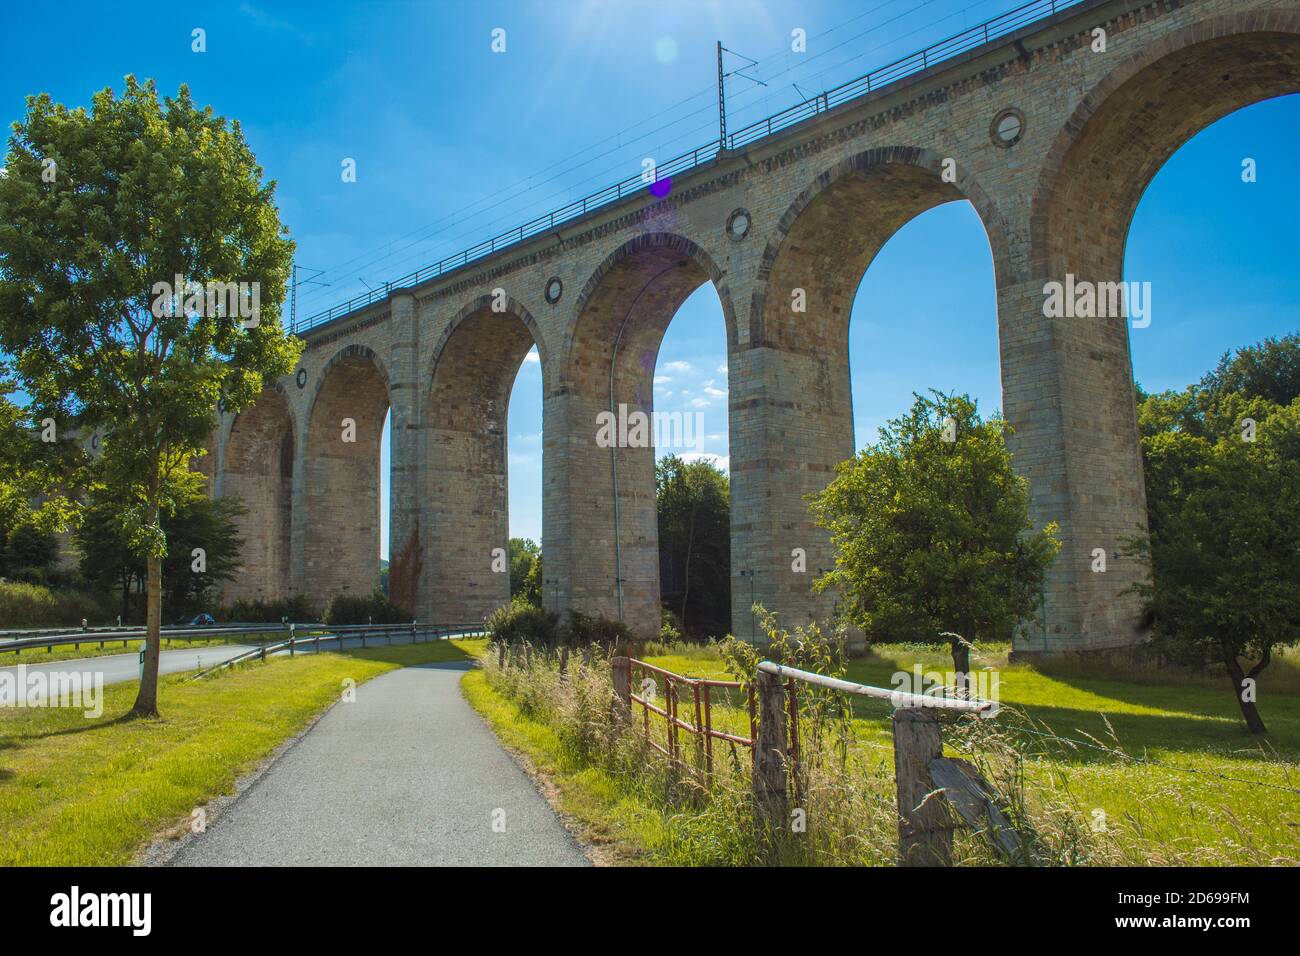 Train viaduct in Altenbeken, North Rhine Westphalia, Germany. Old stone railway surrounded by green park Stock Photo